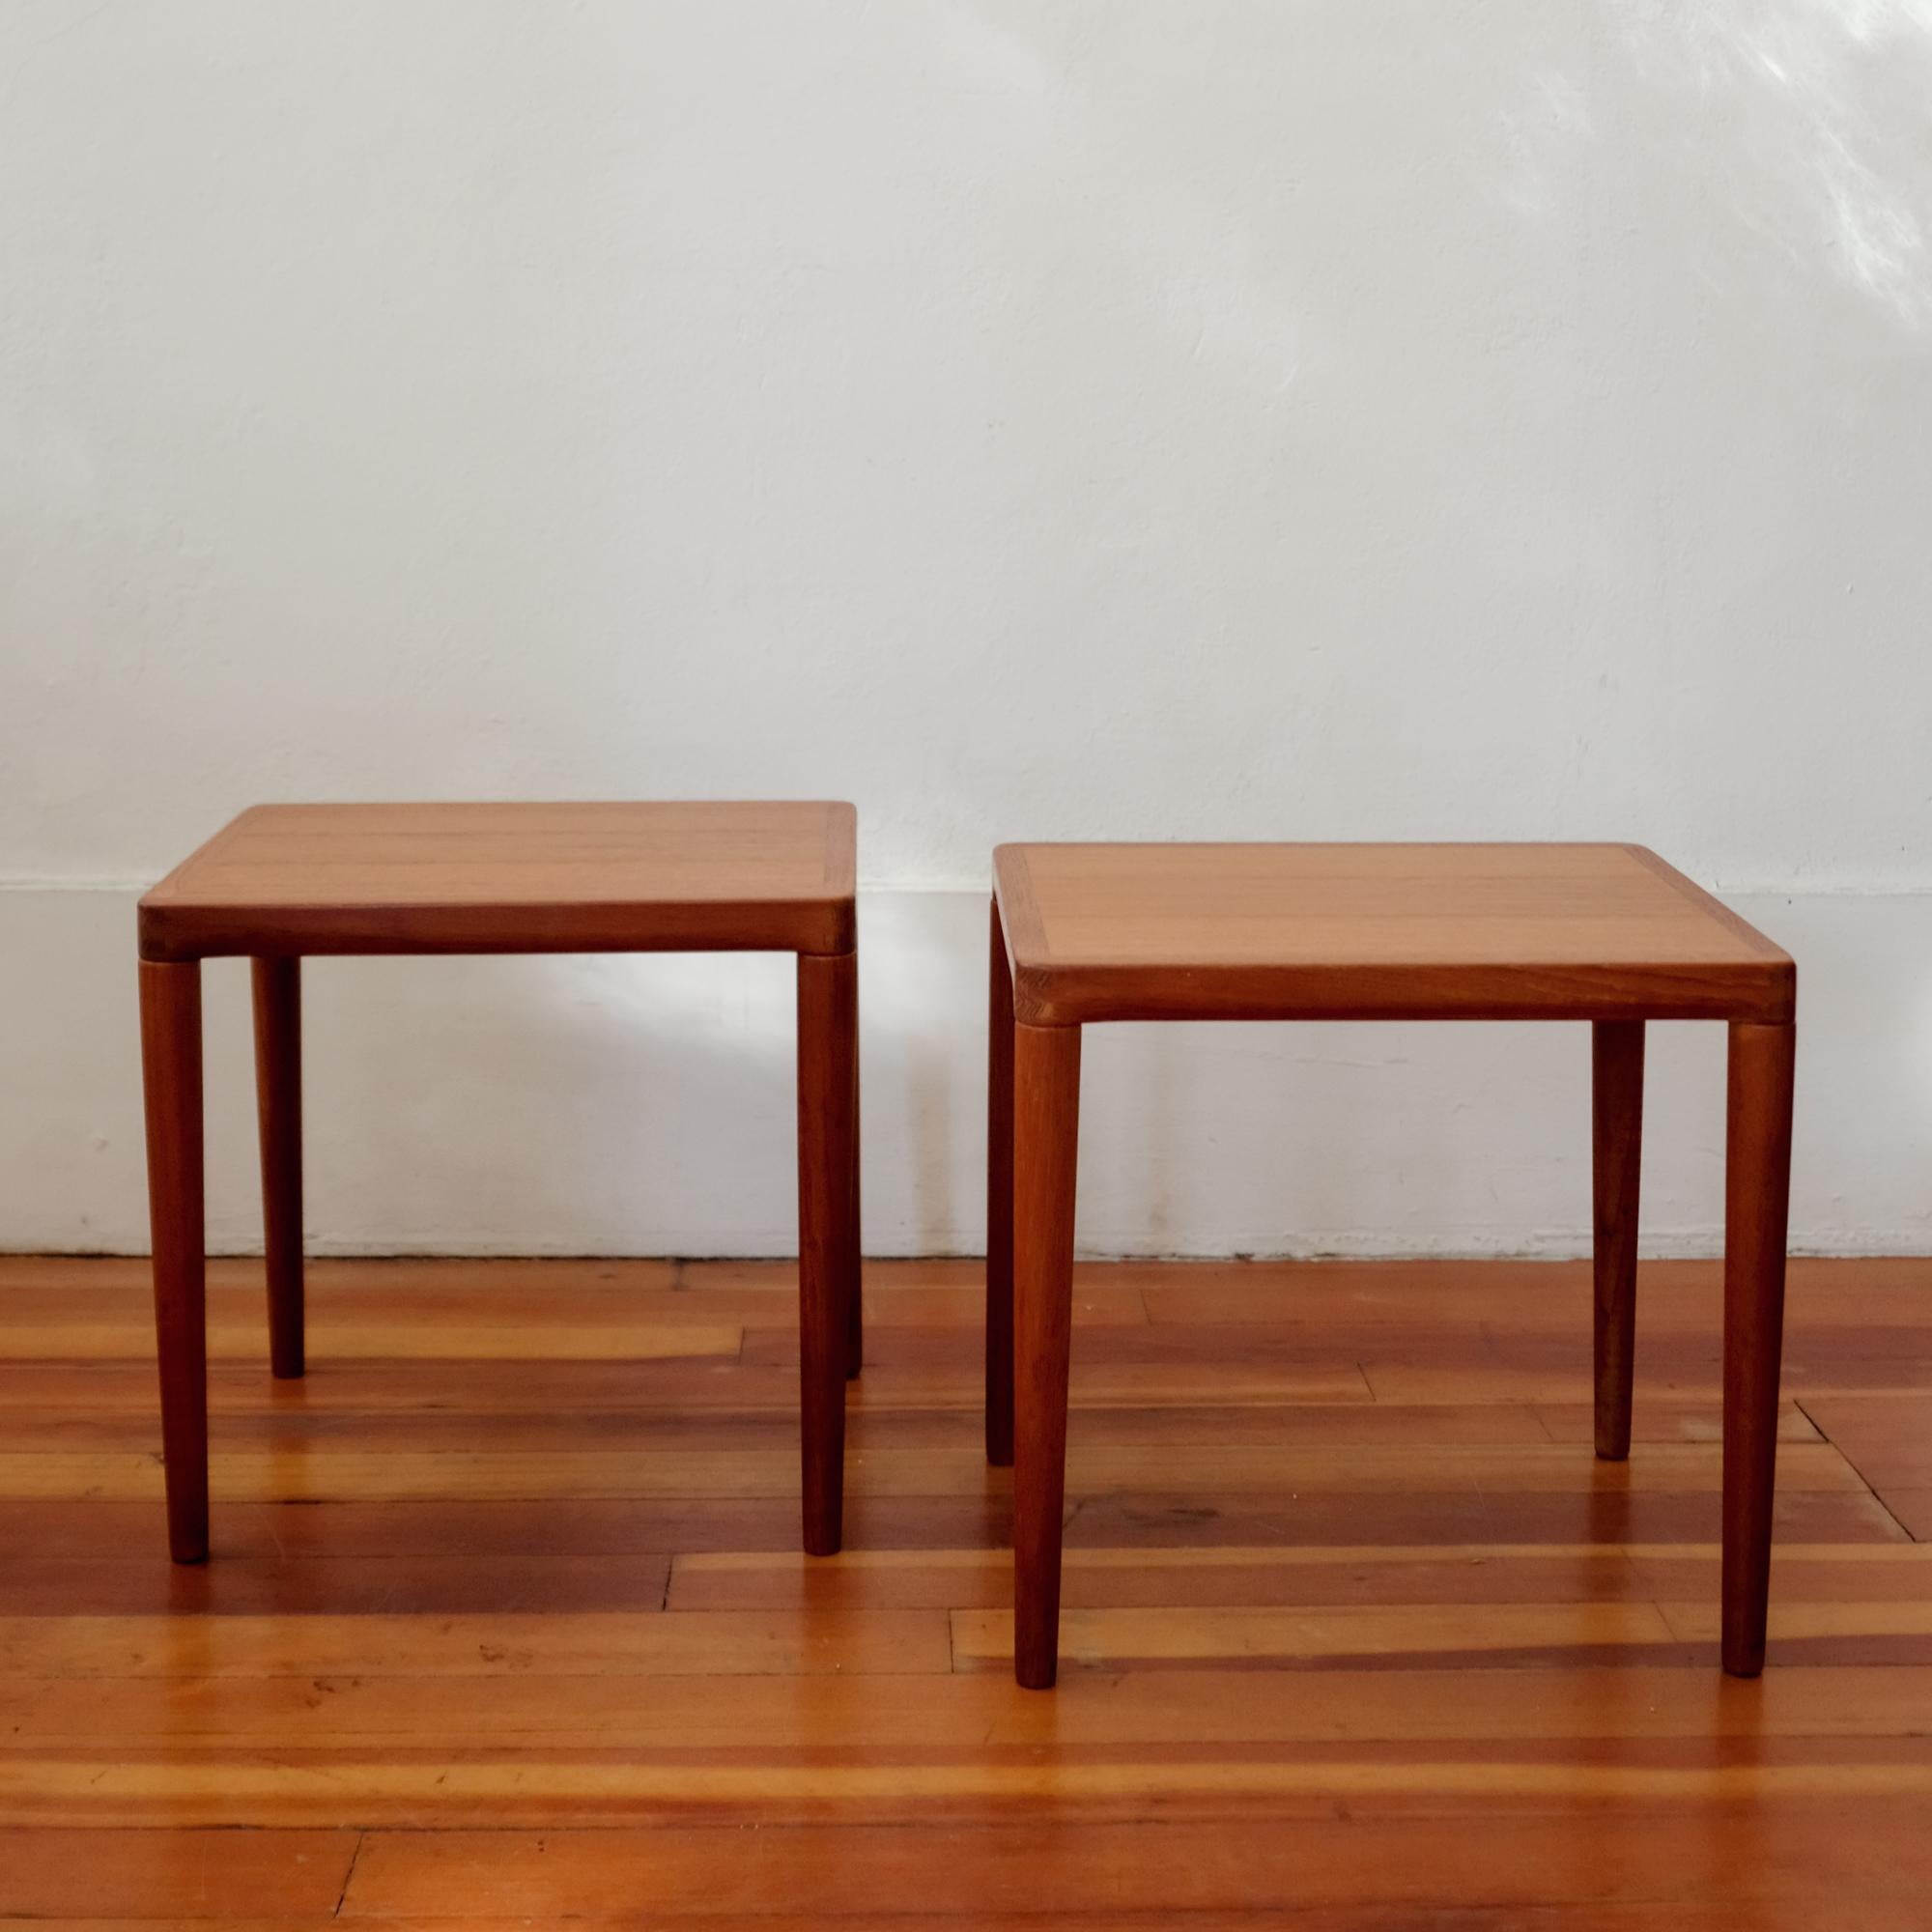 Pair of teak occasional tables by Norwegian designer Henry Walter (H.W.) Klein. Fantastic details and joinery on these small scale tables.

In the late 1940s Klein moved to Denmark. While there, he studied interior design at the Tekniske Skile in